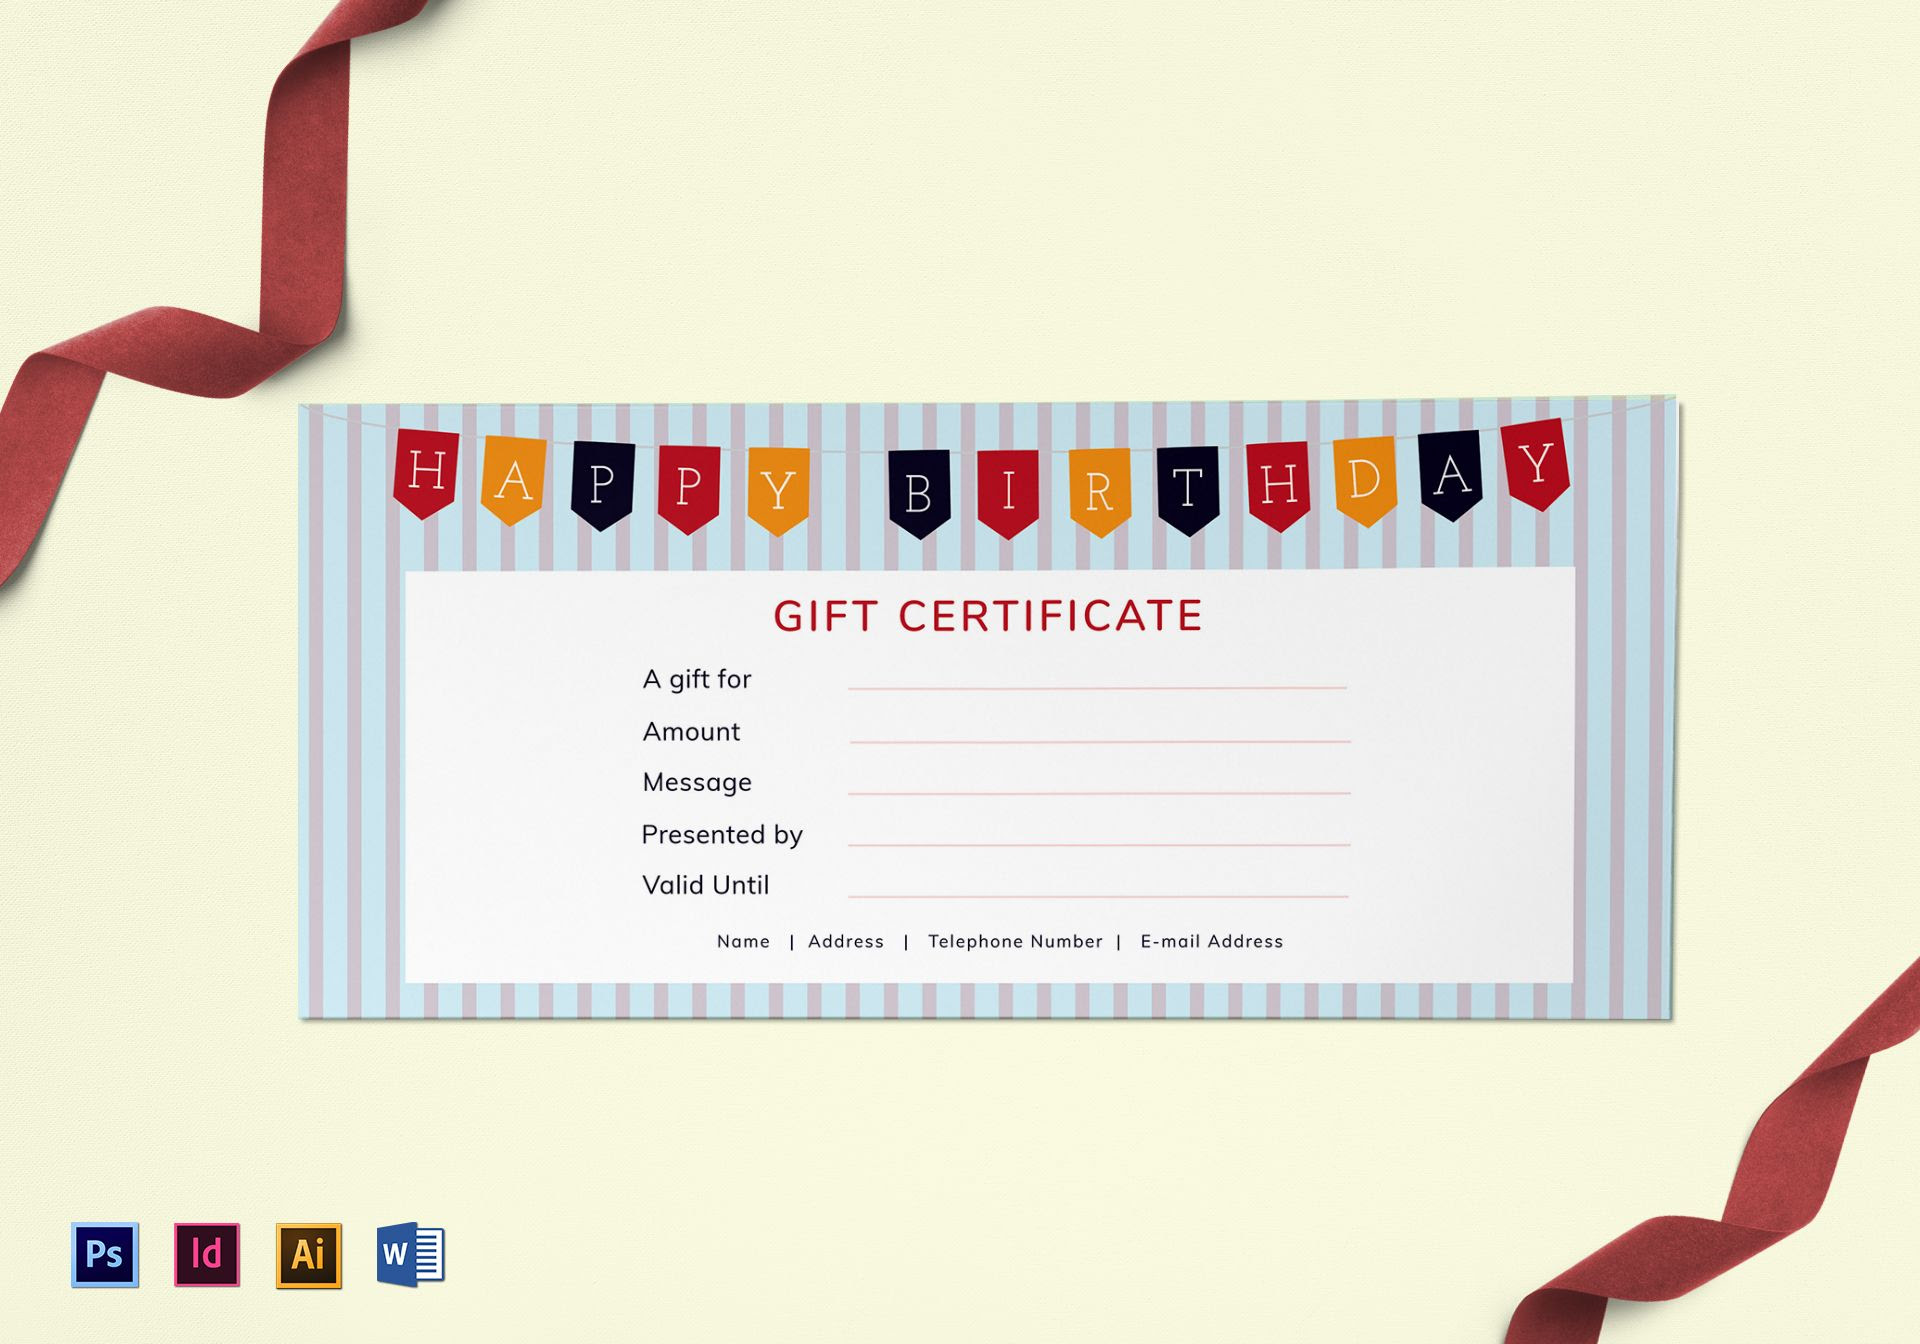 Happy Birthday Gift Certificate Design Template in PSD, Word